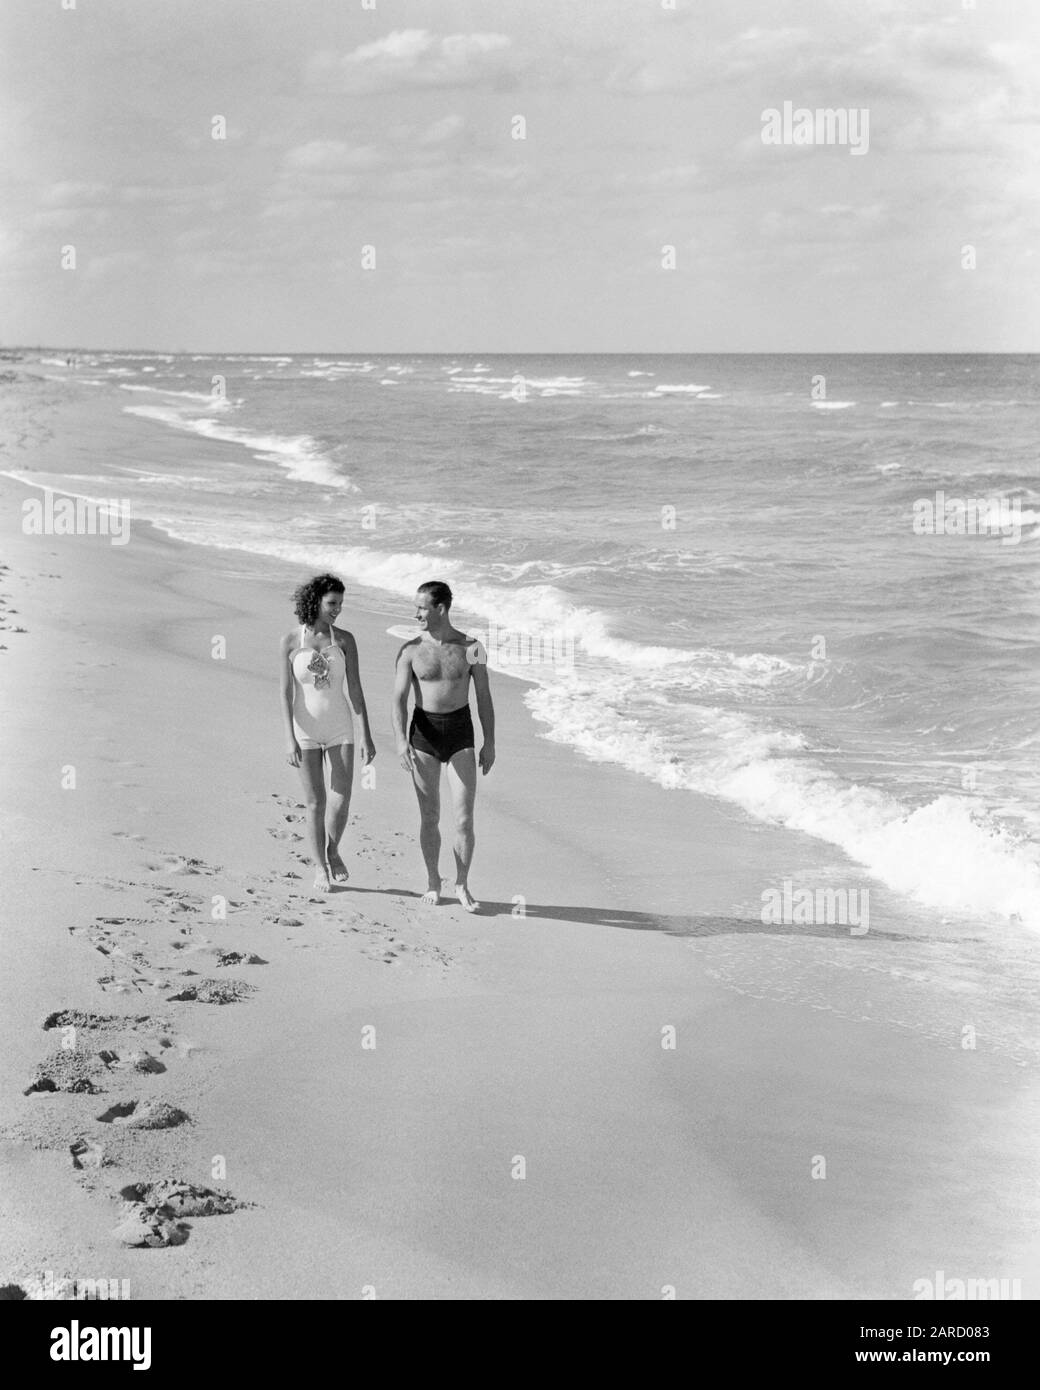 1930s 1940s COUPLE WEARING BATHING SUITS WALKING TALKING TOGETHER ON BRIGHT WARM SUNLIT SEASHORE OCEAN BEACH SAND - b7062 HAR001 HARS HEALTHY BALANCE STRONG JOY LIFESTYLE OCEAN SATISFACTION FEMALES MARRIED SPOUSE HUSBANDS HEALTHINESS COPY SPACE FRIENDSHIP FULL-LENGTH LADIES PERSONS SCENIC INSPIRATION CARING MALES SUNLIGHT WARM SERENITY B&W PARTNER FREEDOM ACTIVITY DREAMS HAPPINESS PHYSICAL BRIGHT WELLNESS HIGH ANGLE LEISURE STRENGTH RECREATION ON STROLLING CONCEPTUAL ESCAPE FLEXIBILITY MUSCLES SUNLIT BATHING SUITS PERSONAL ATTACHMENT AFFECTION EMOTION MID-ADULT MID-ADULT MAN MID-ADULT WOMAN Stock Photo